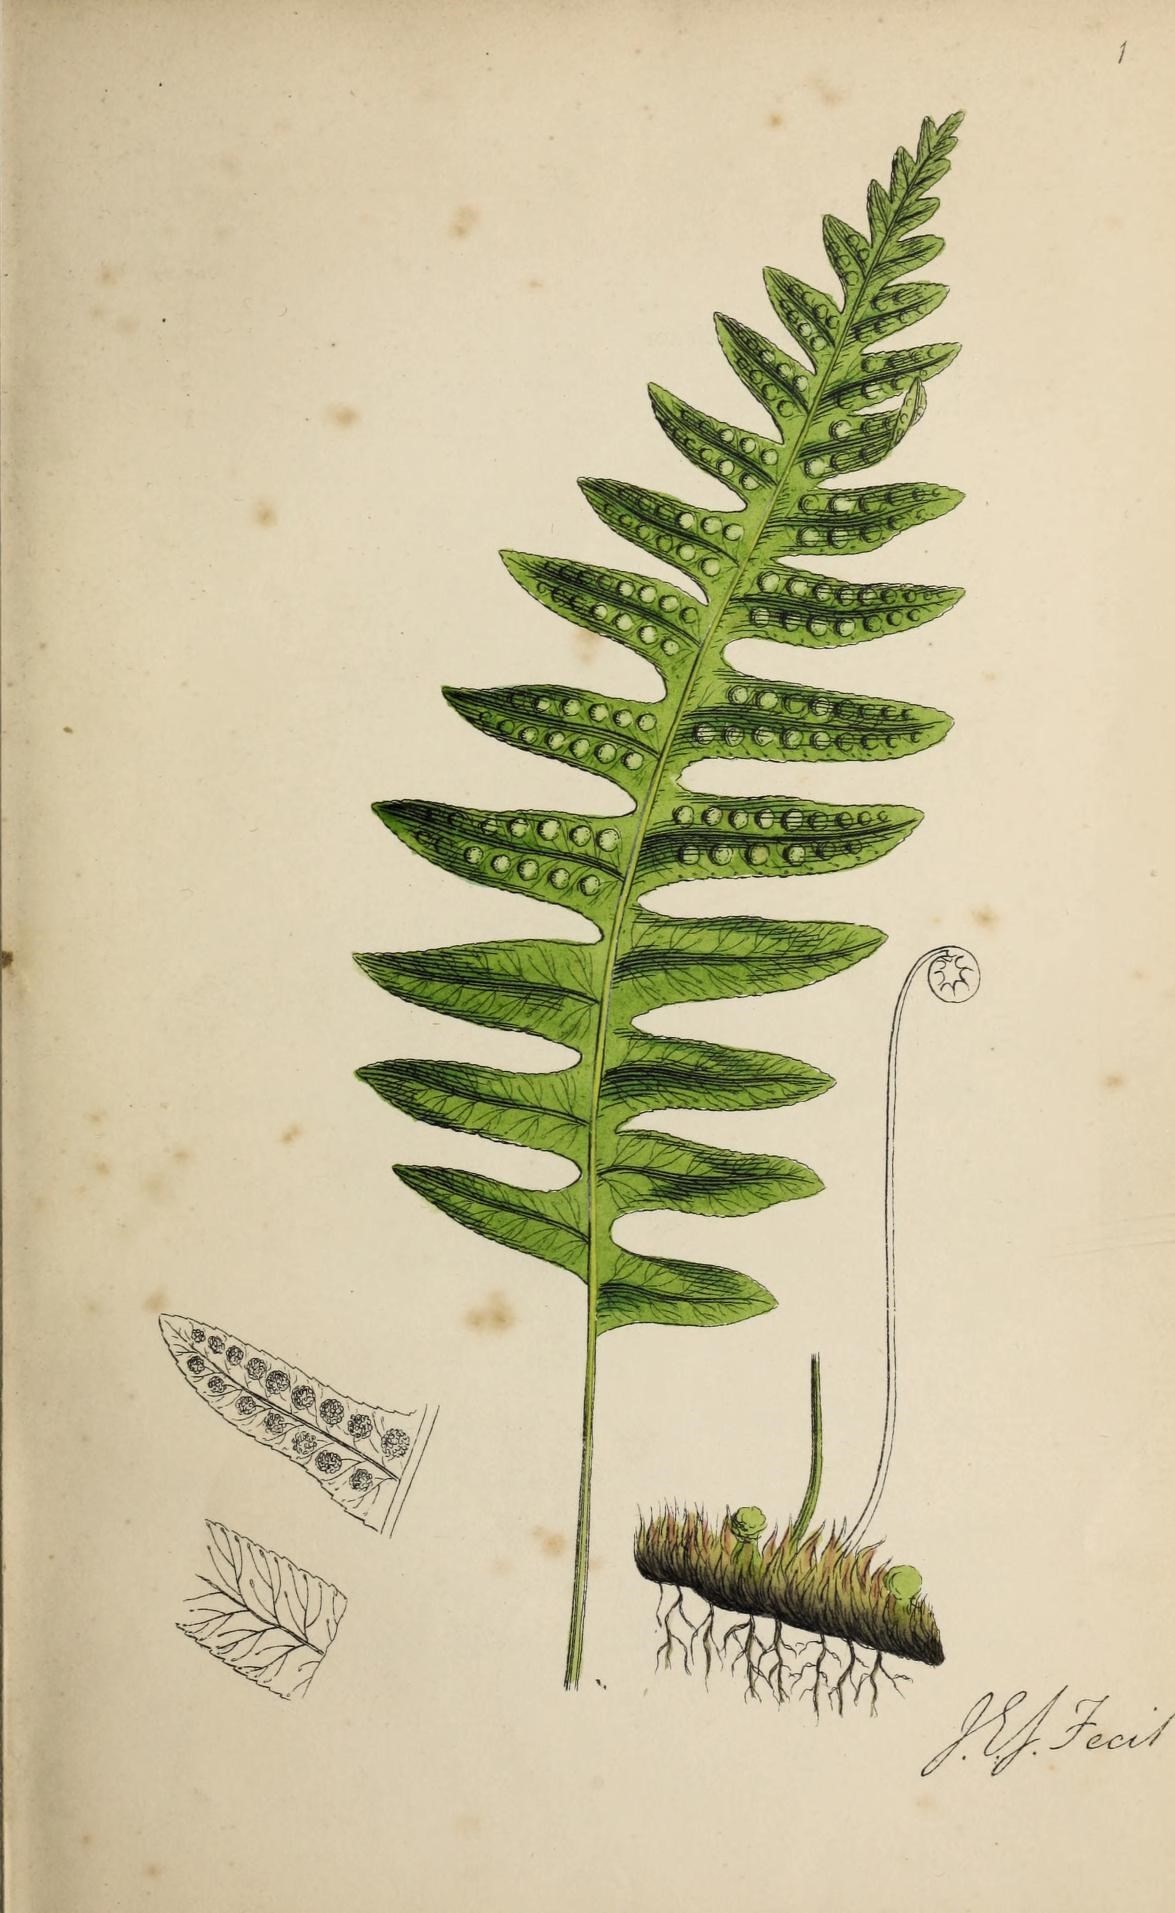 Image of common polypody